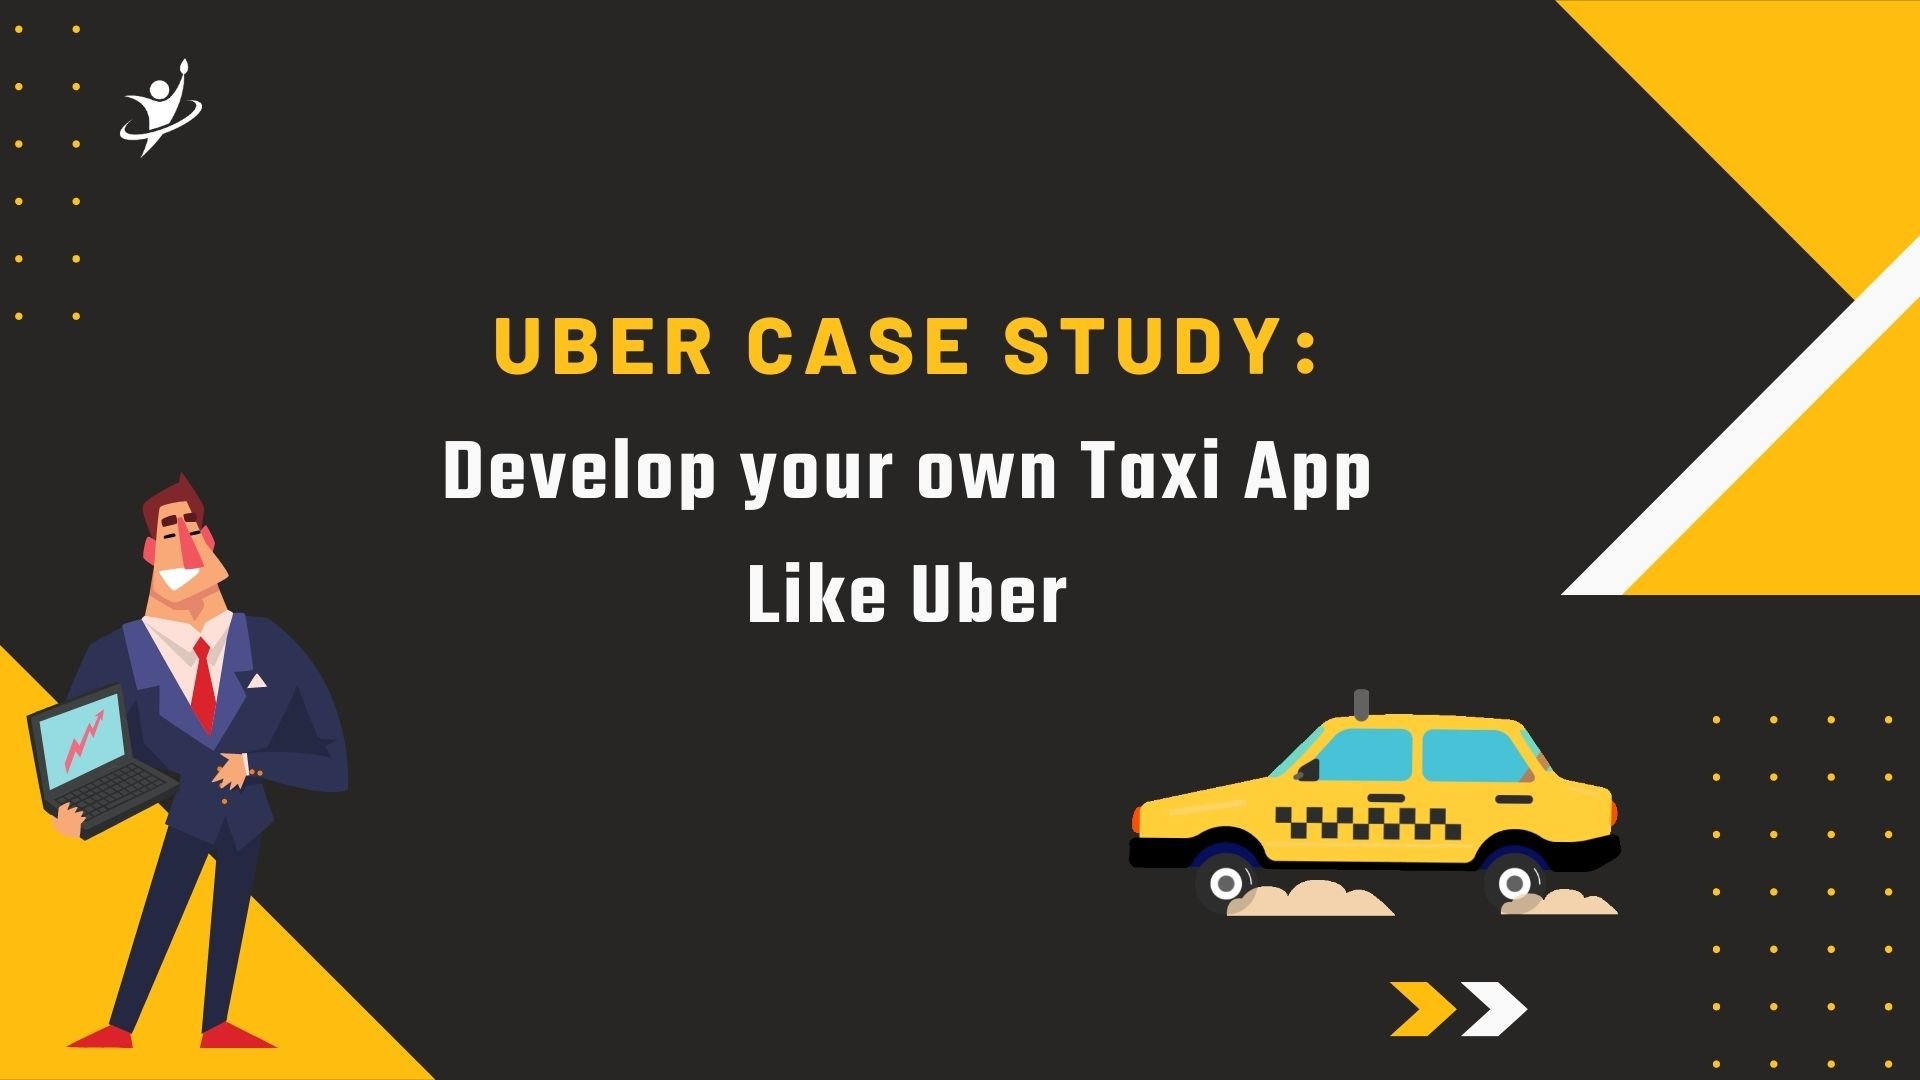 develop your own taxi app like uber